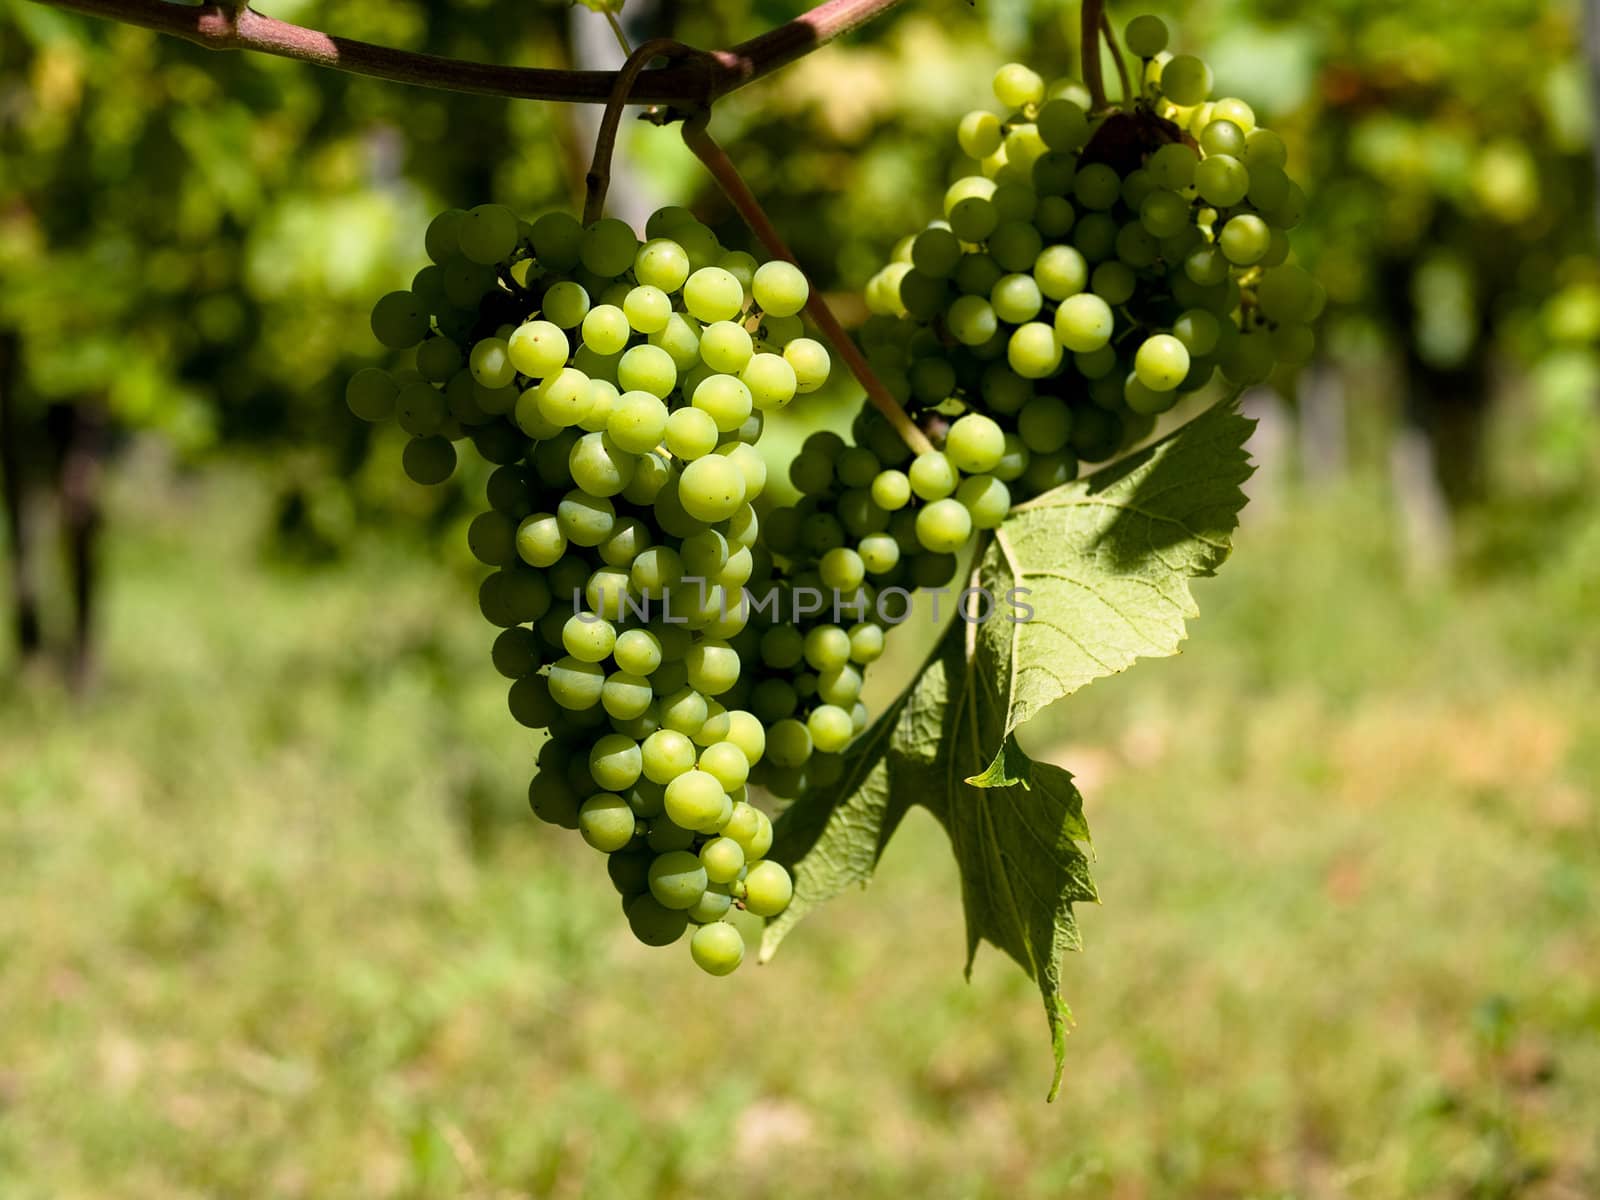 Close up picture of wine grapes in France